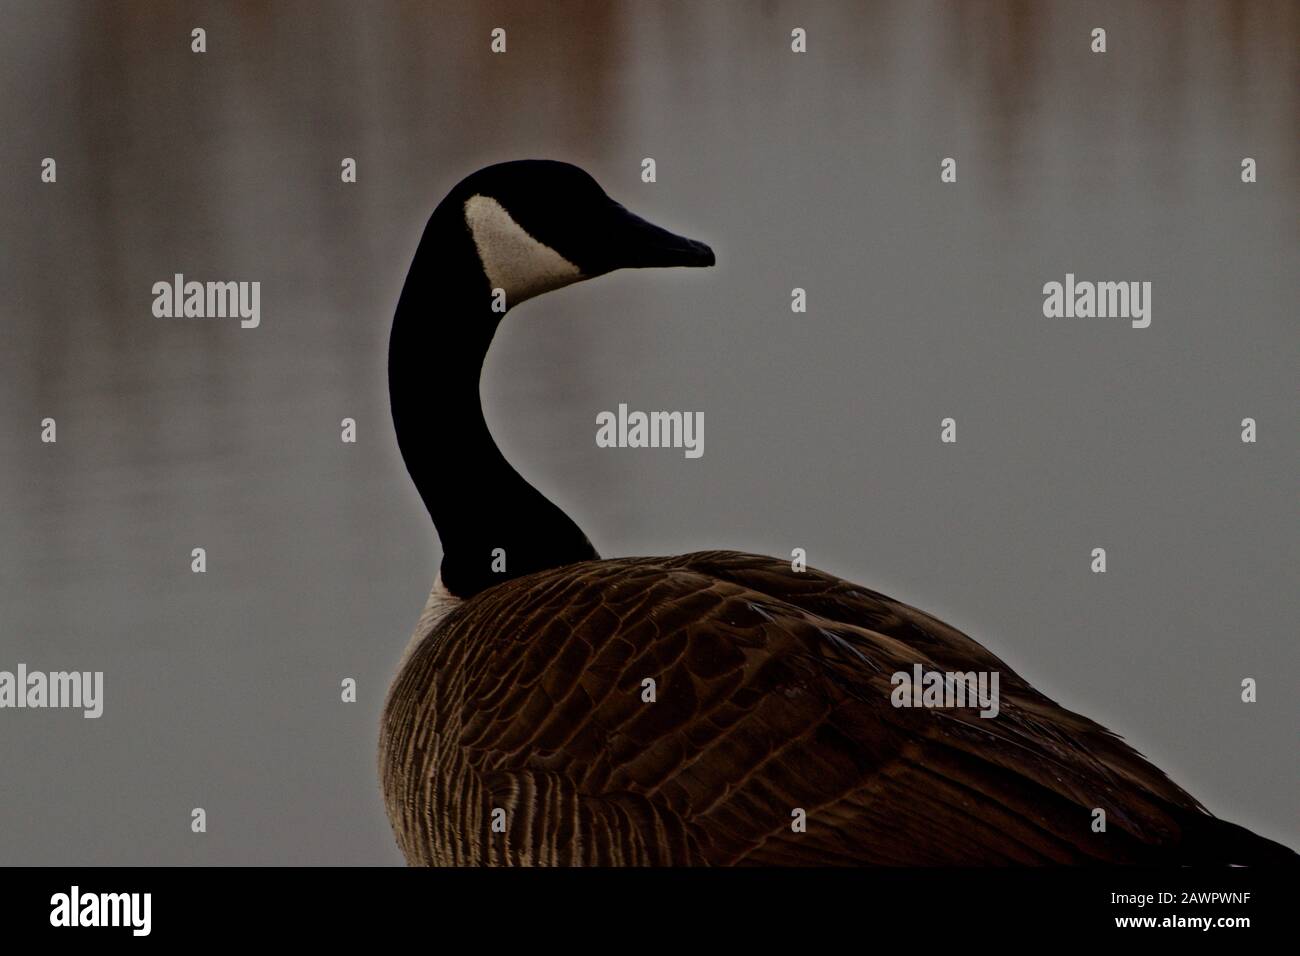 Wintering Canada geese near Canyon in the Texas Panhandle. Stock Photo